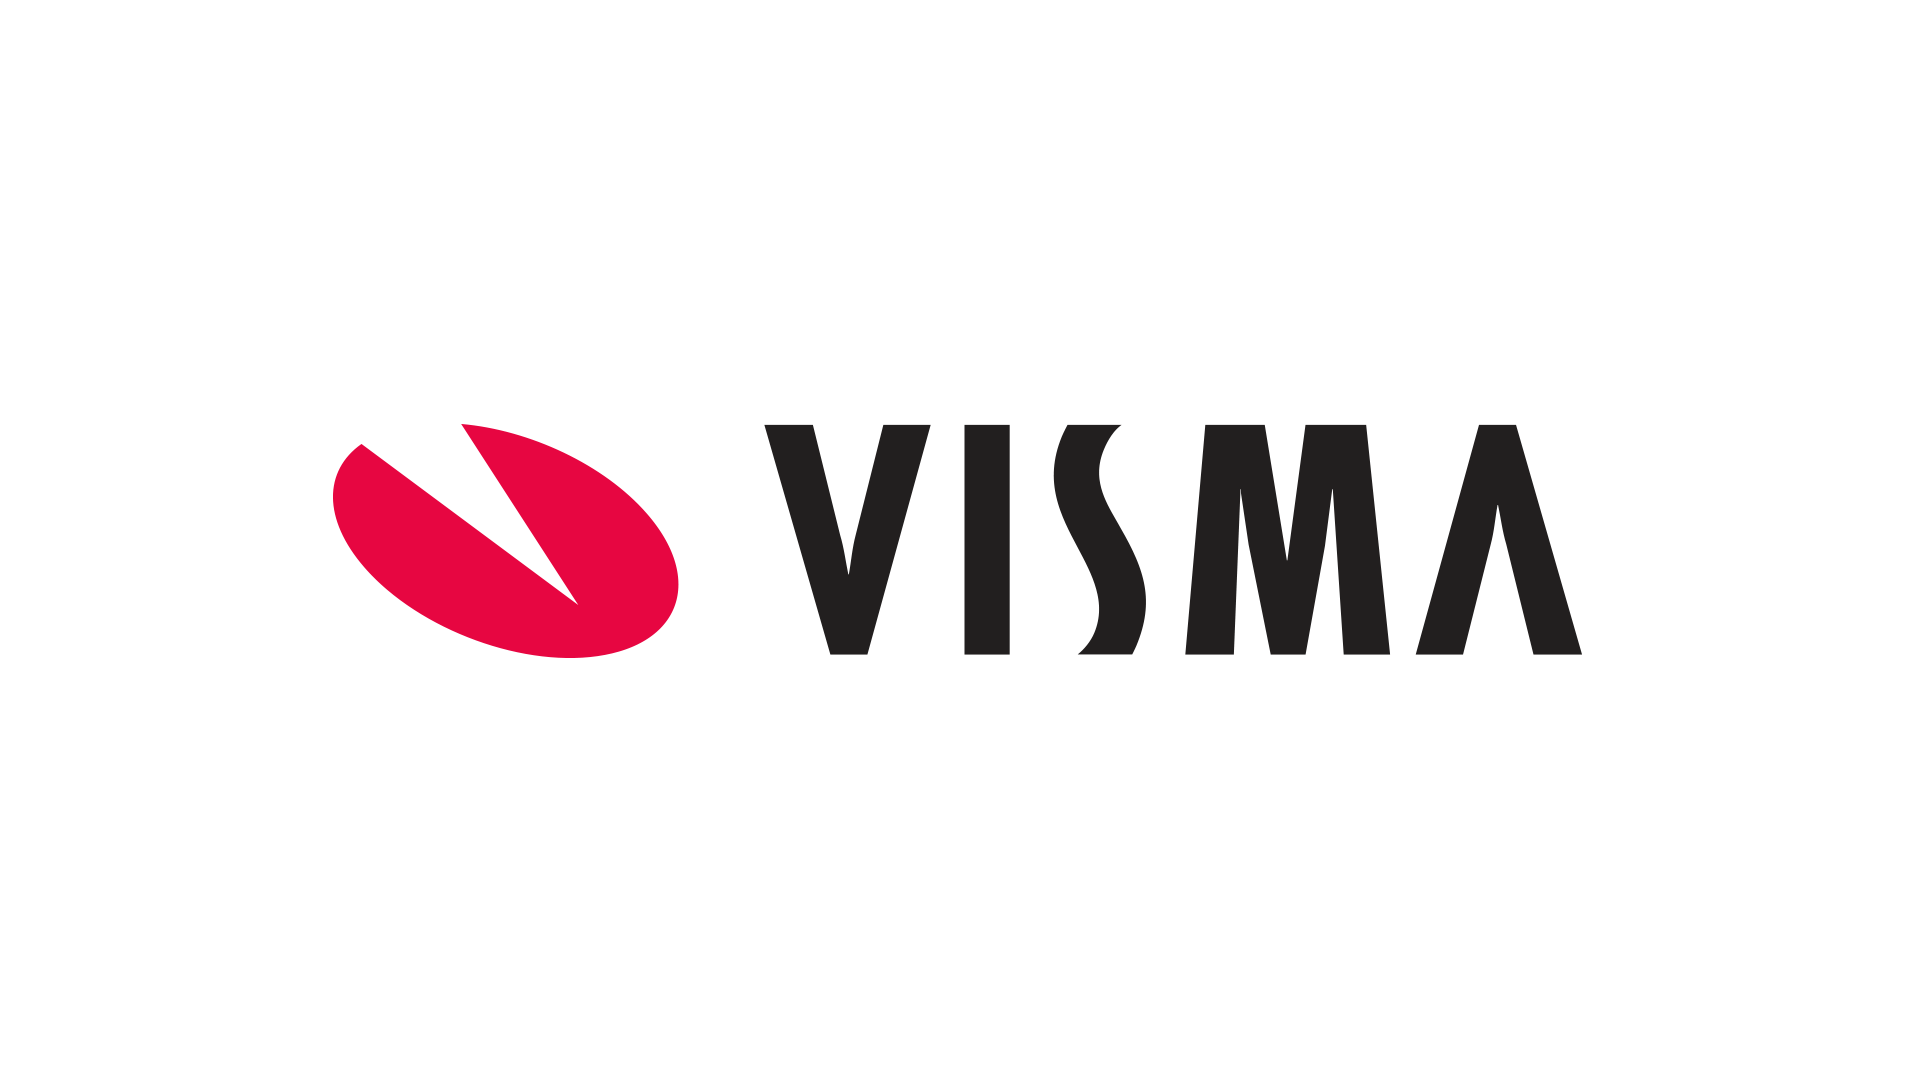 You can now integrate tracezilla with Visma eEkonomi